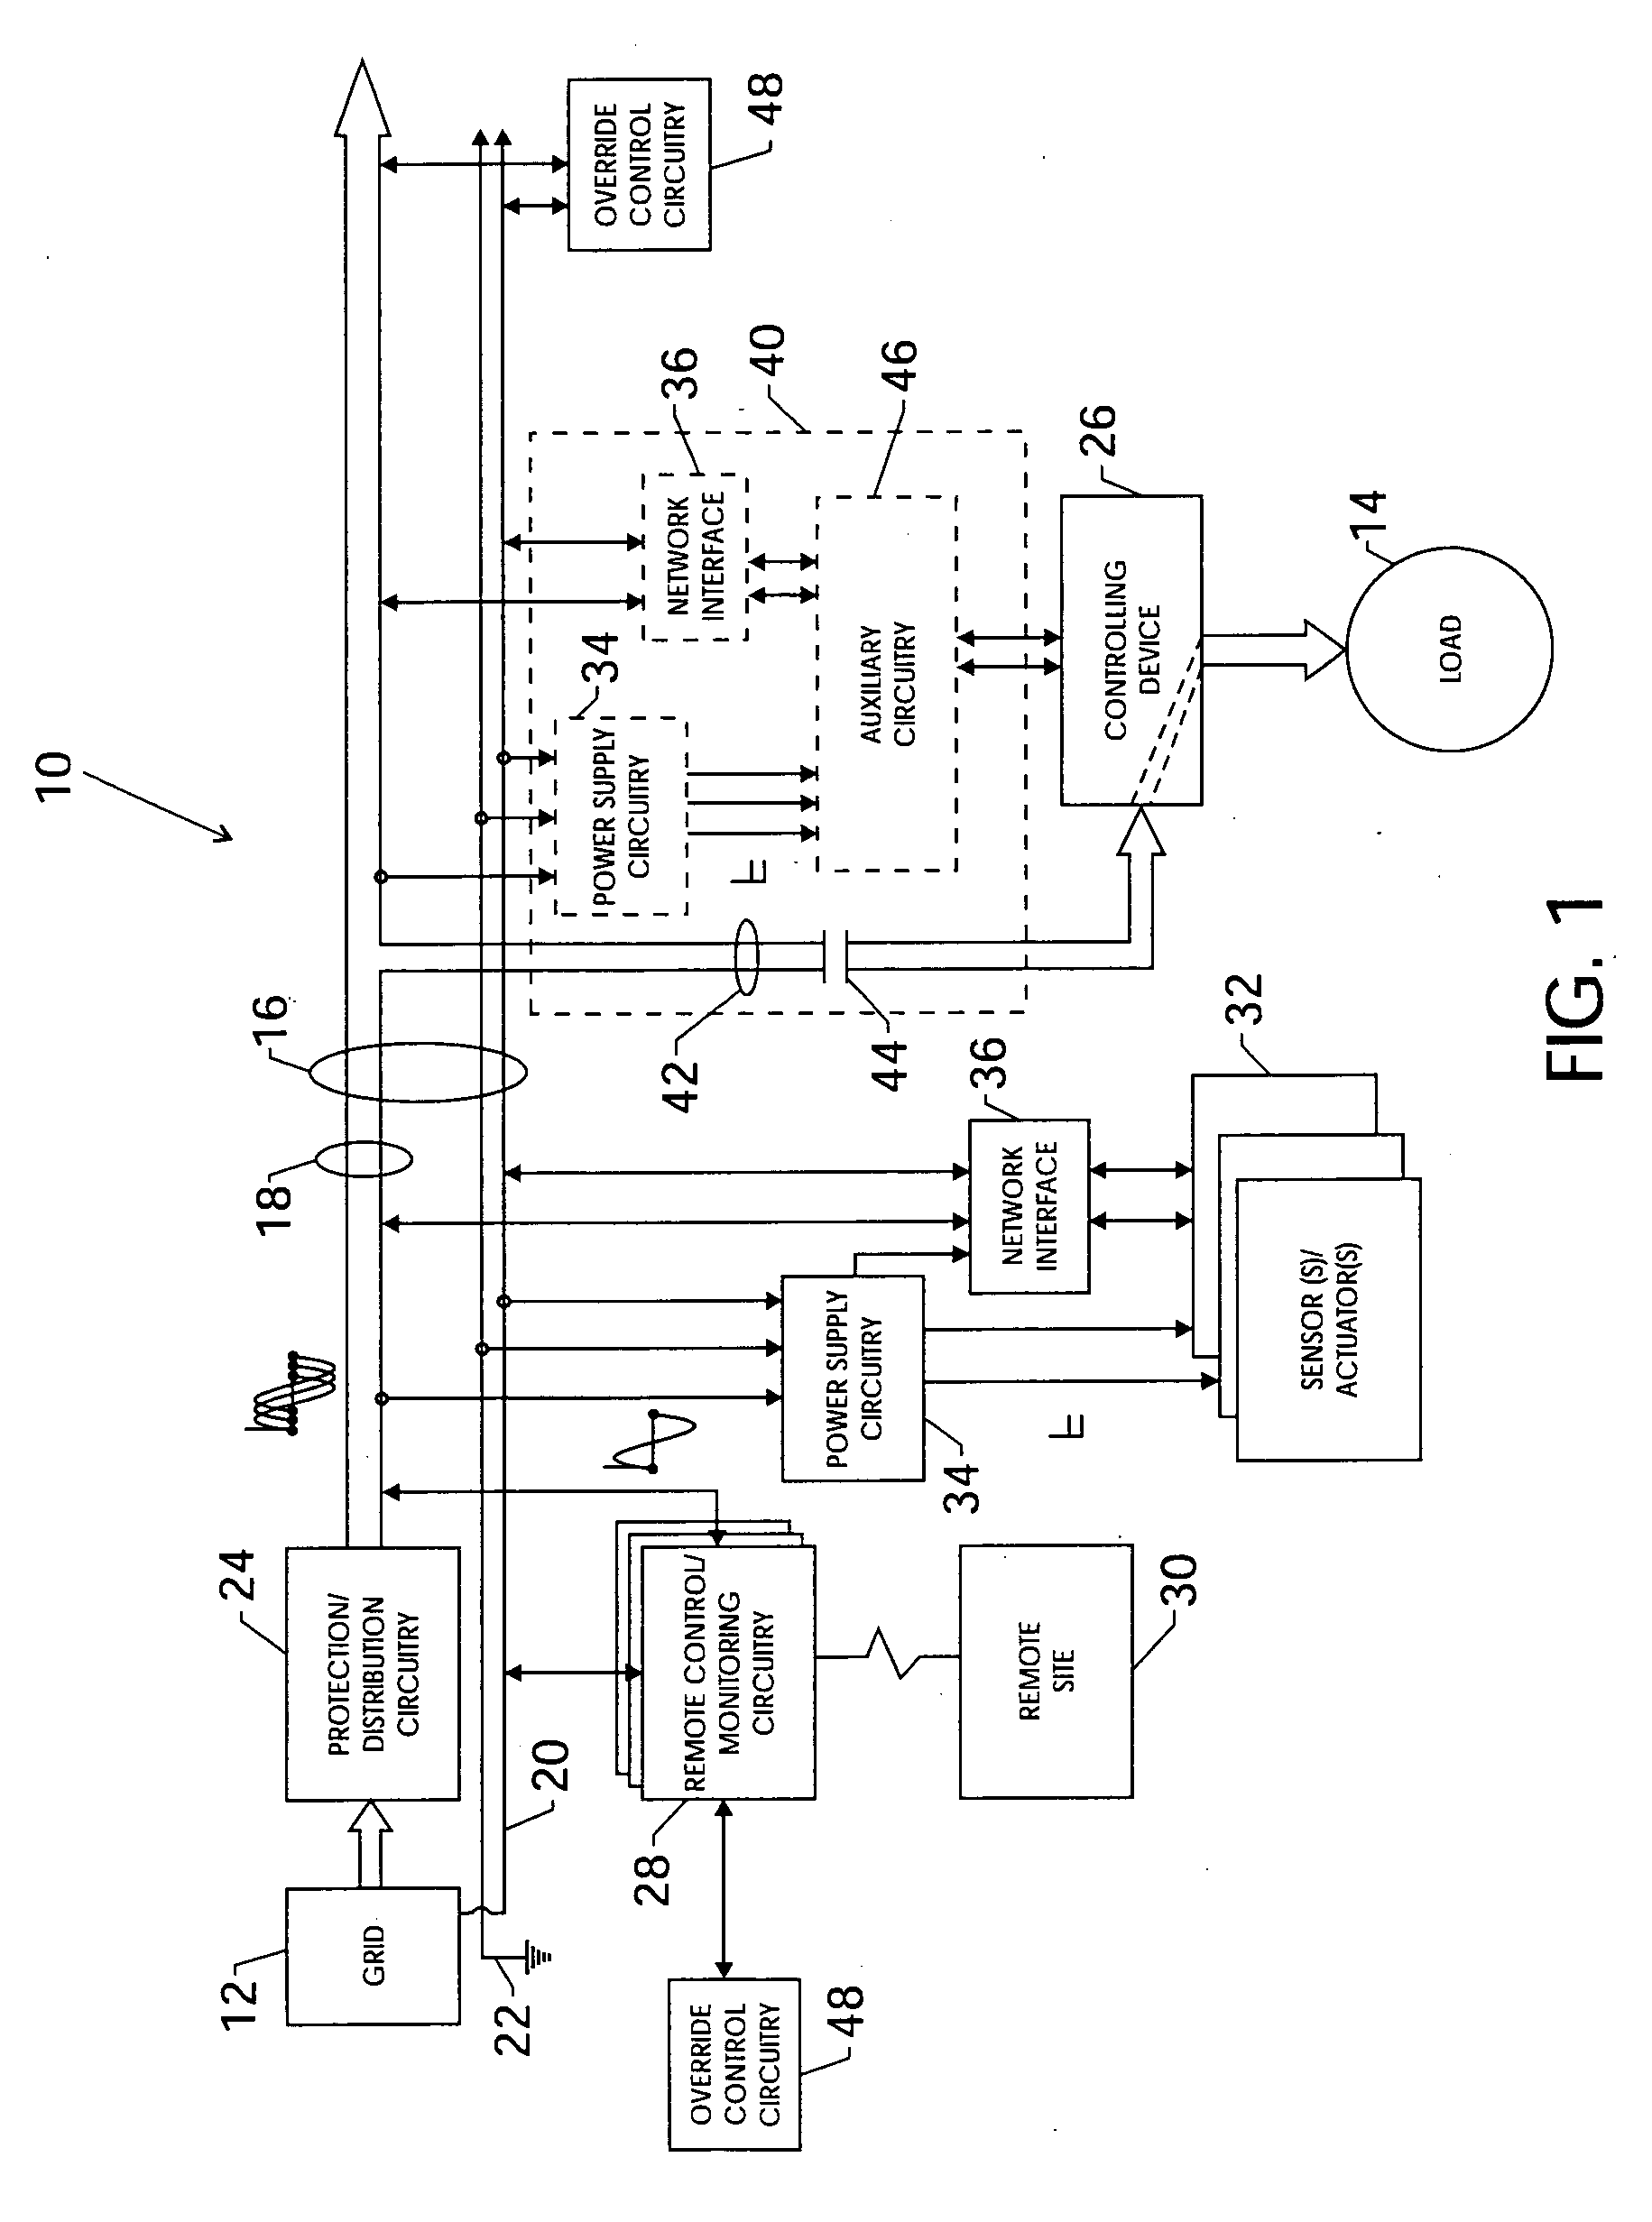 Multi-function integrated automation cable system and method